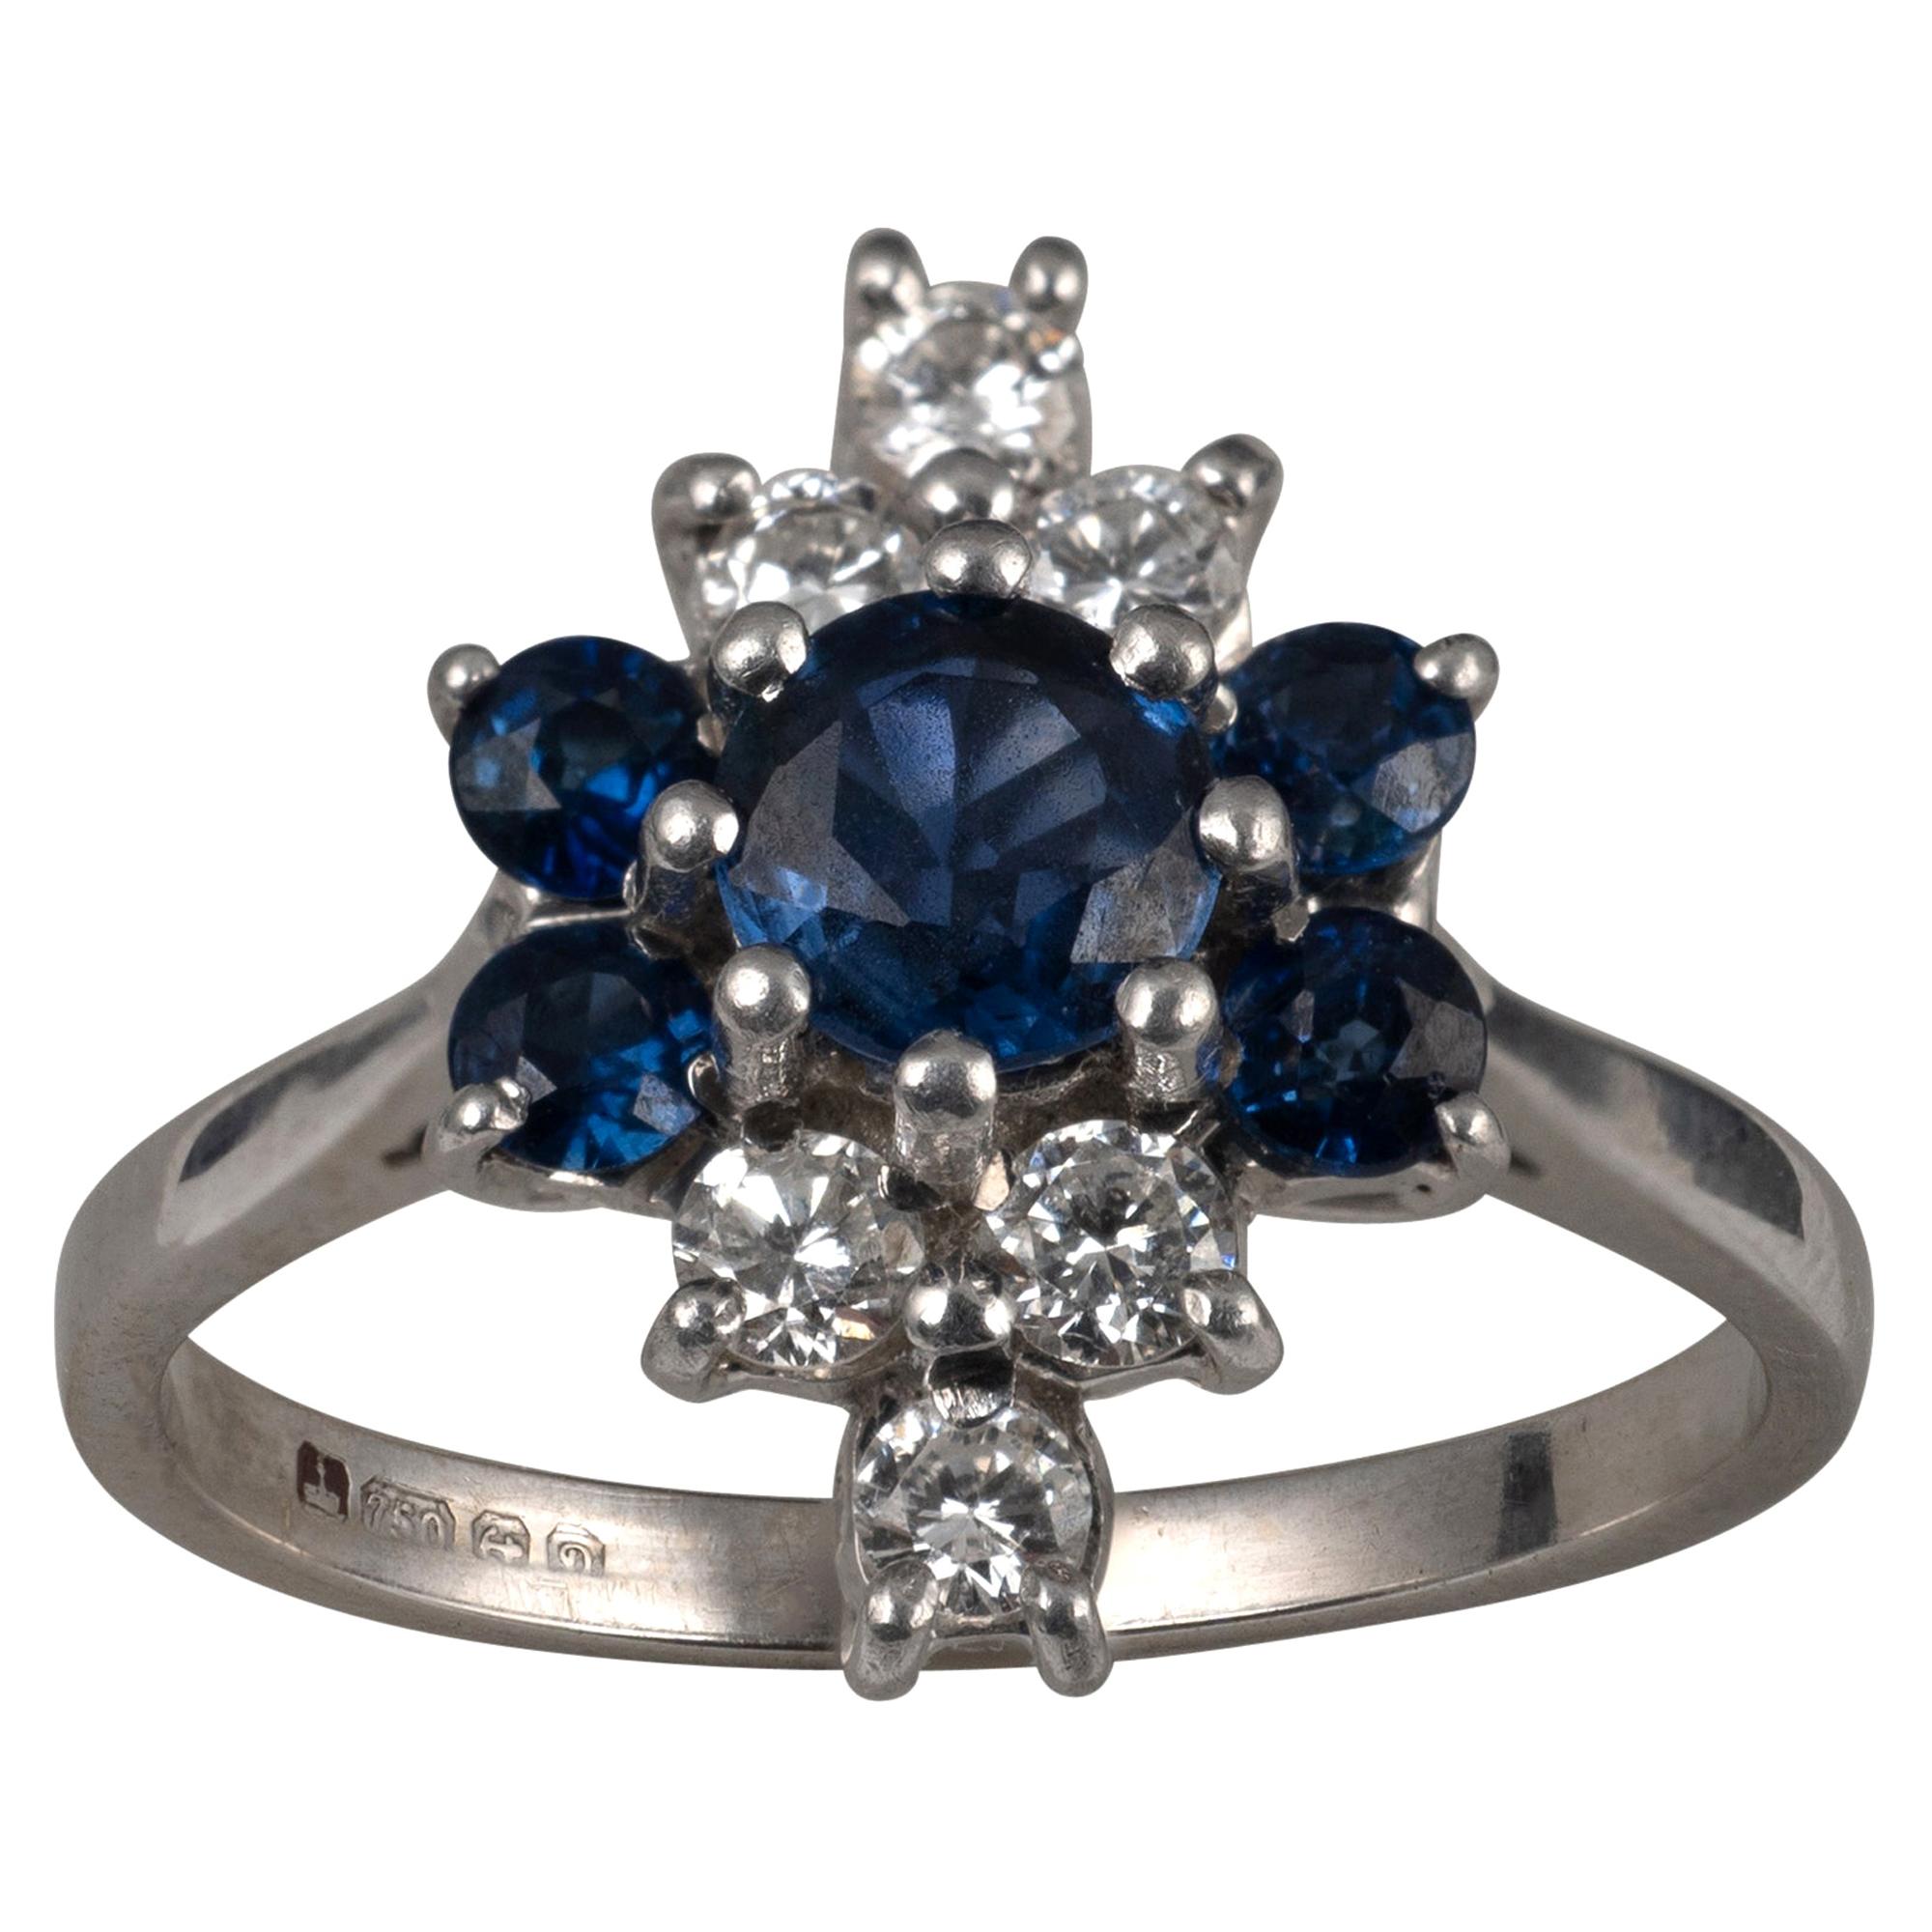 Sapphire Diamond Cluster Ring 18 Karat White Gold Ring size: US size 6.5 For Sale